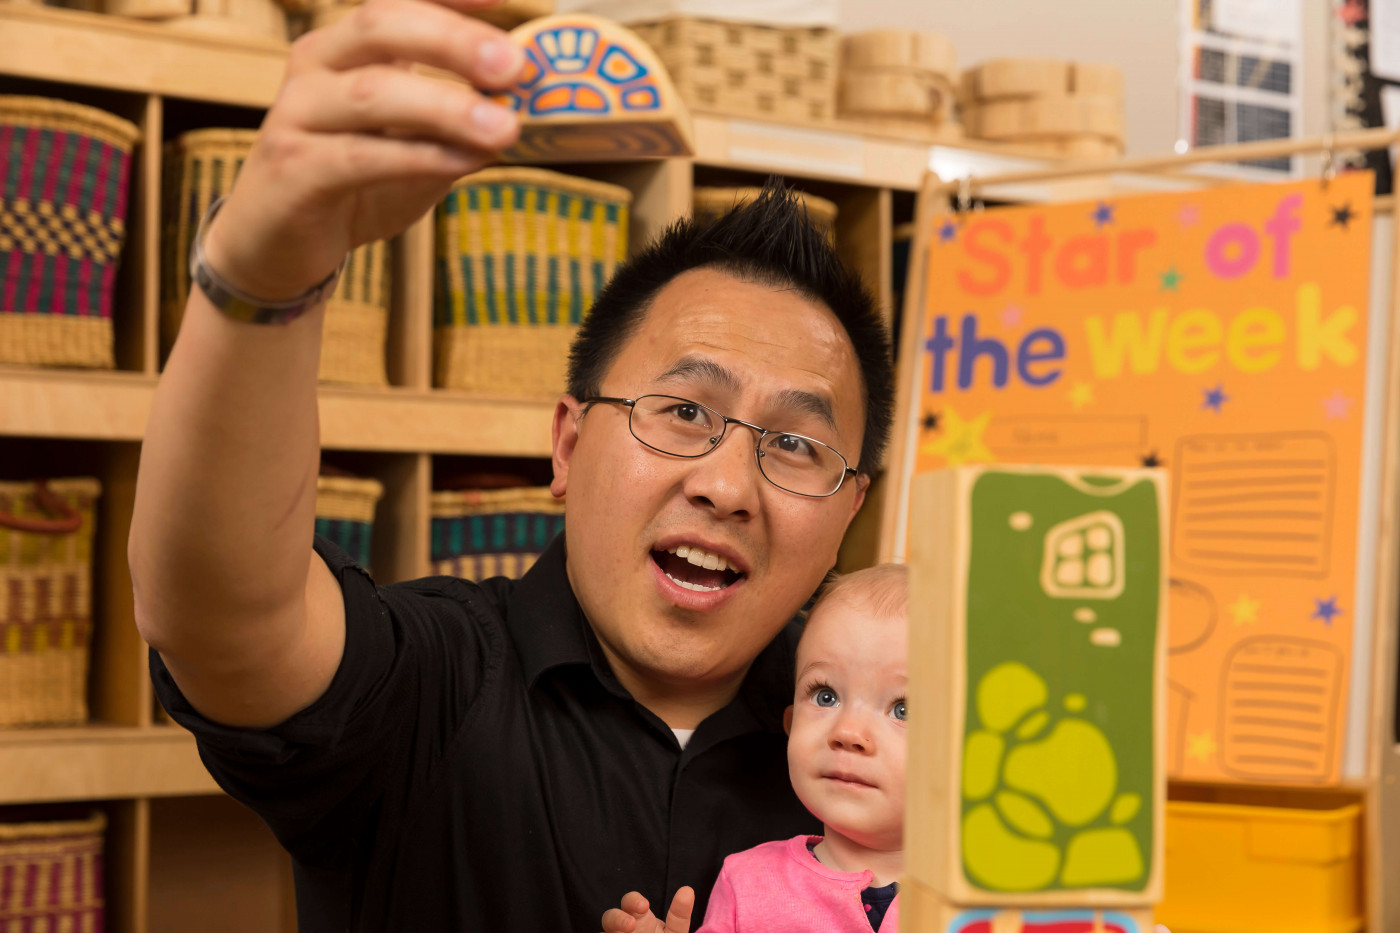 Early Childhood teacher holding toys up to young child